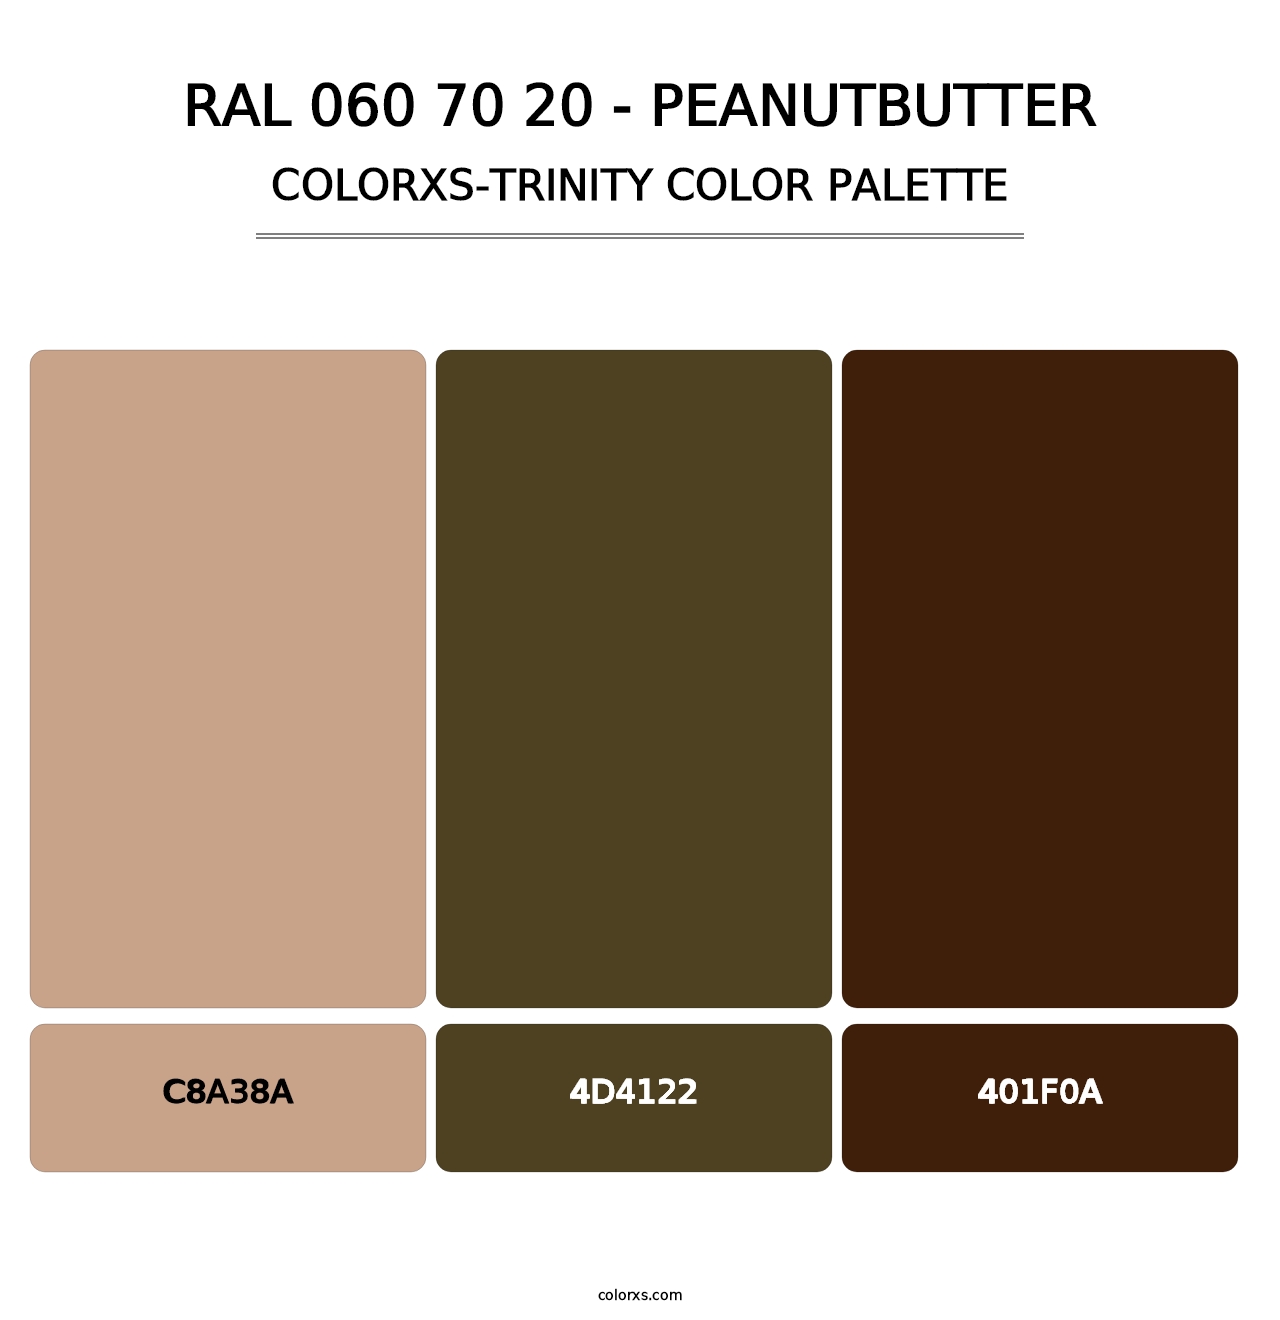 RAL 060 70 20 - Peanutbutter - Colorxs Trinity Palette